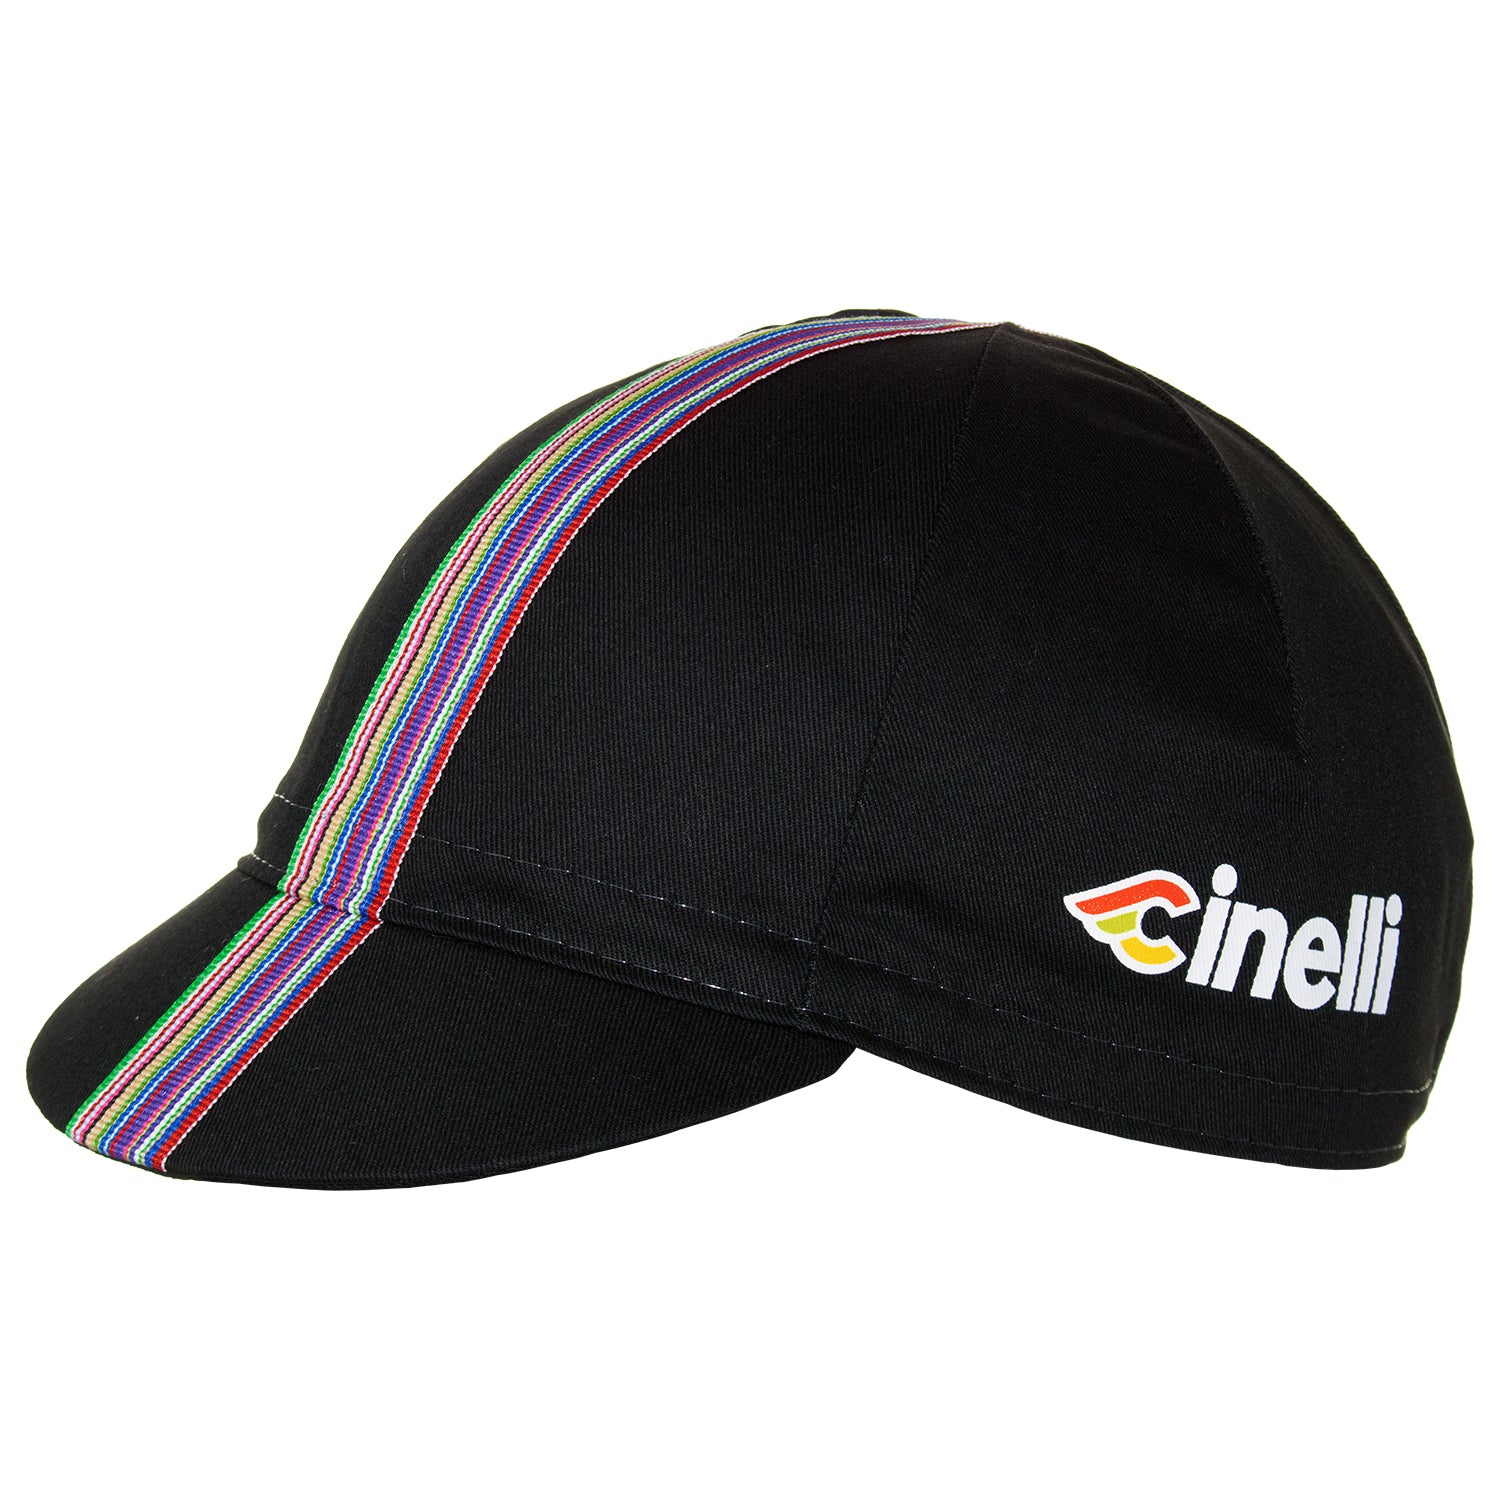 Side of the Cinelli Ciao Black Cotton Cycling Cap. The Cinelli logo is printed on the side and that wonderful multicoloured woven twill ribbon down the centre.